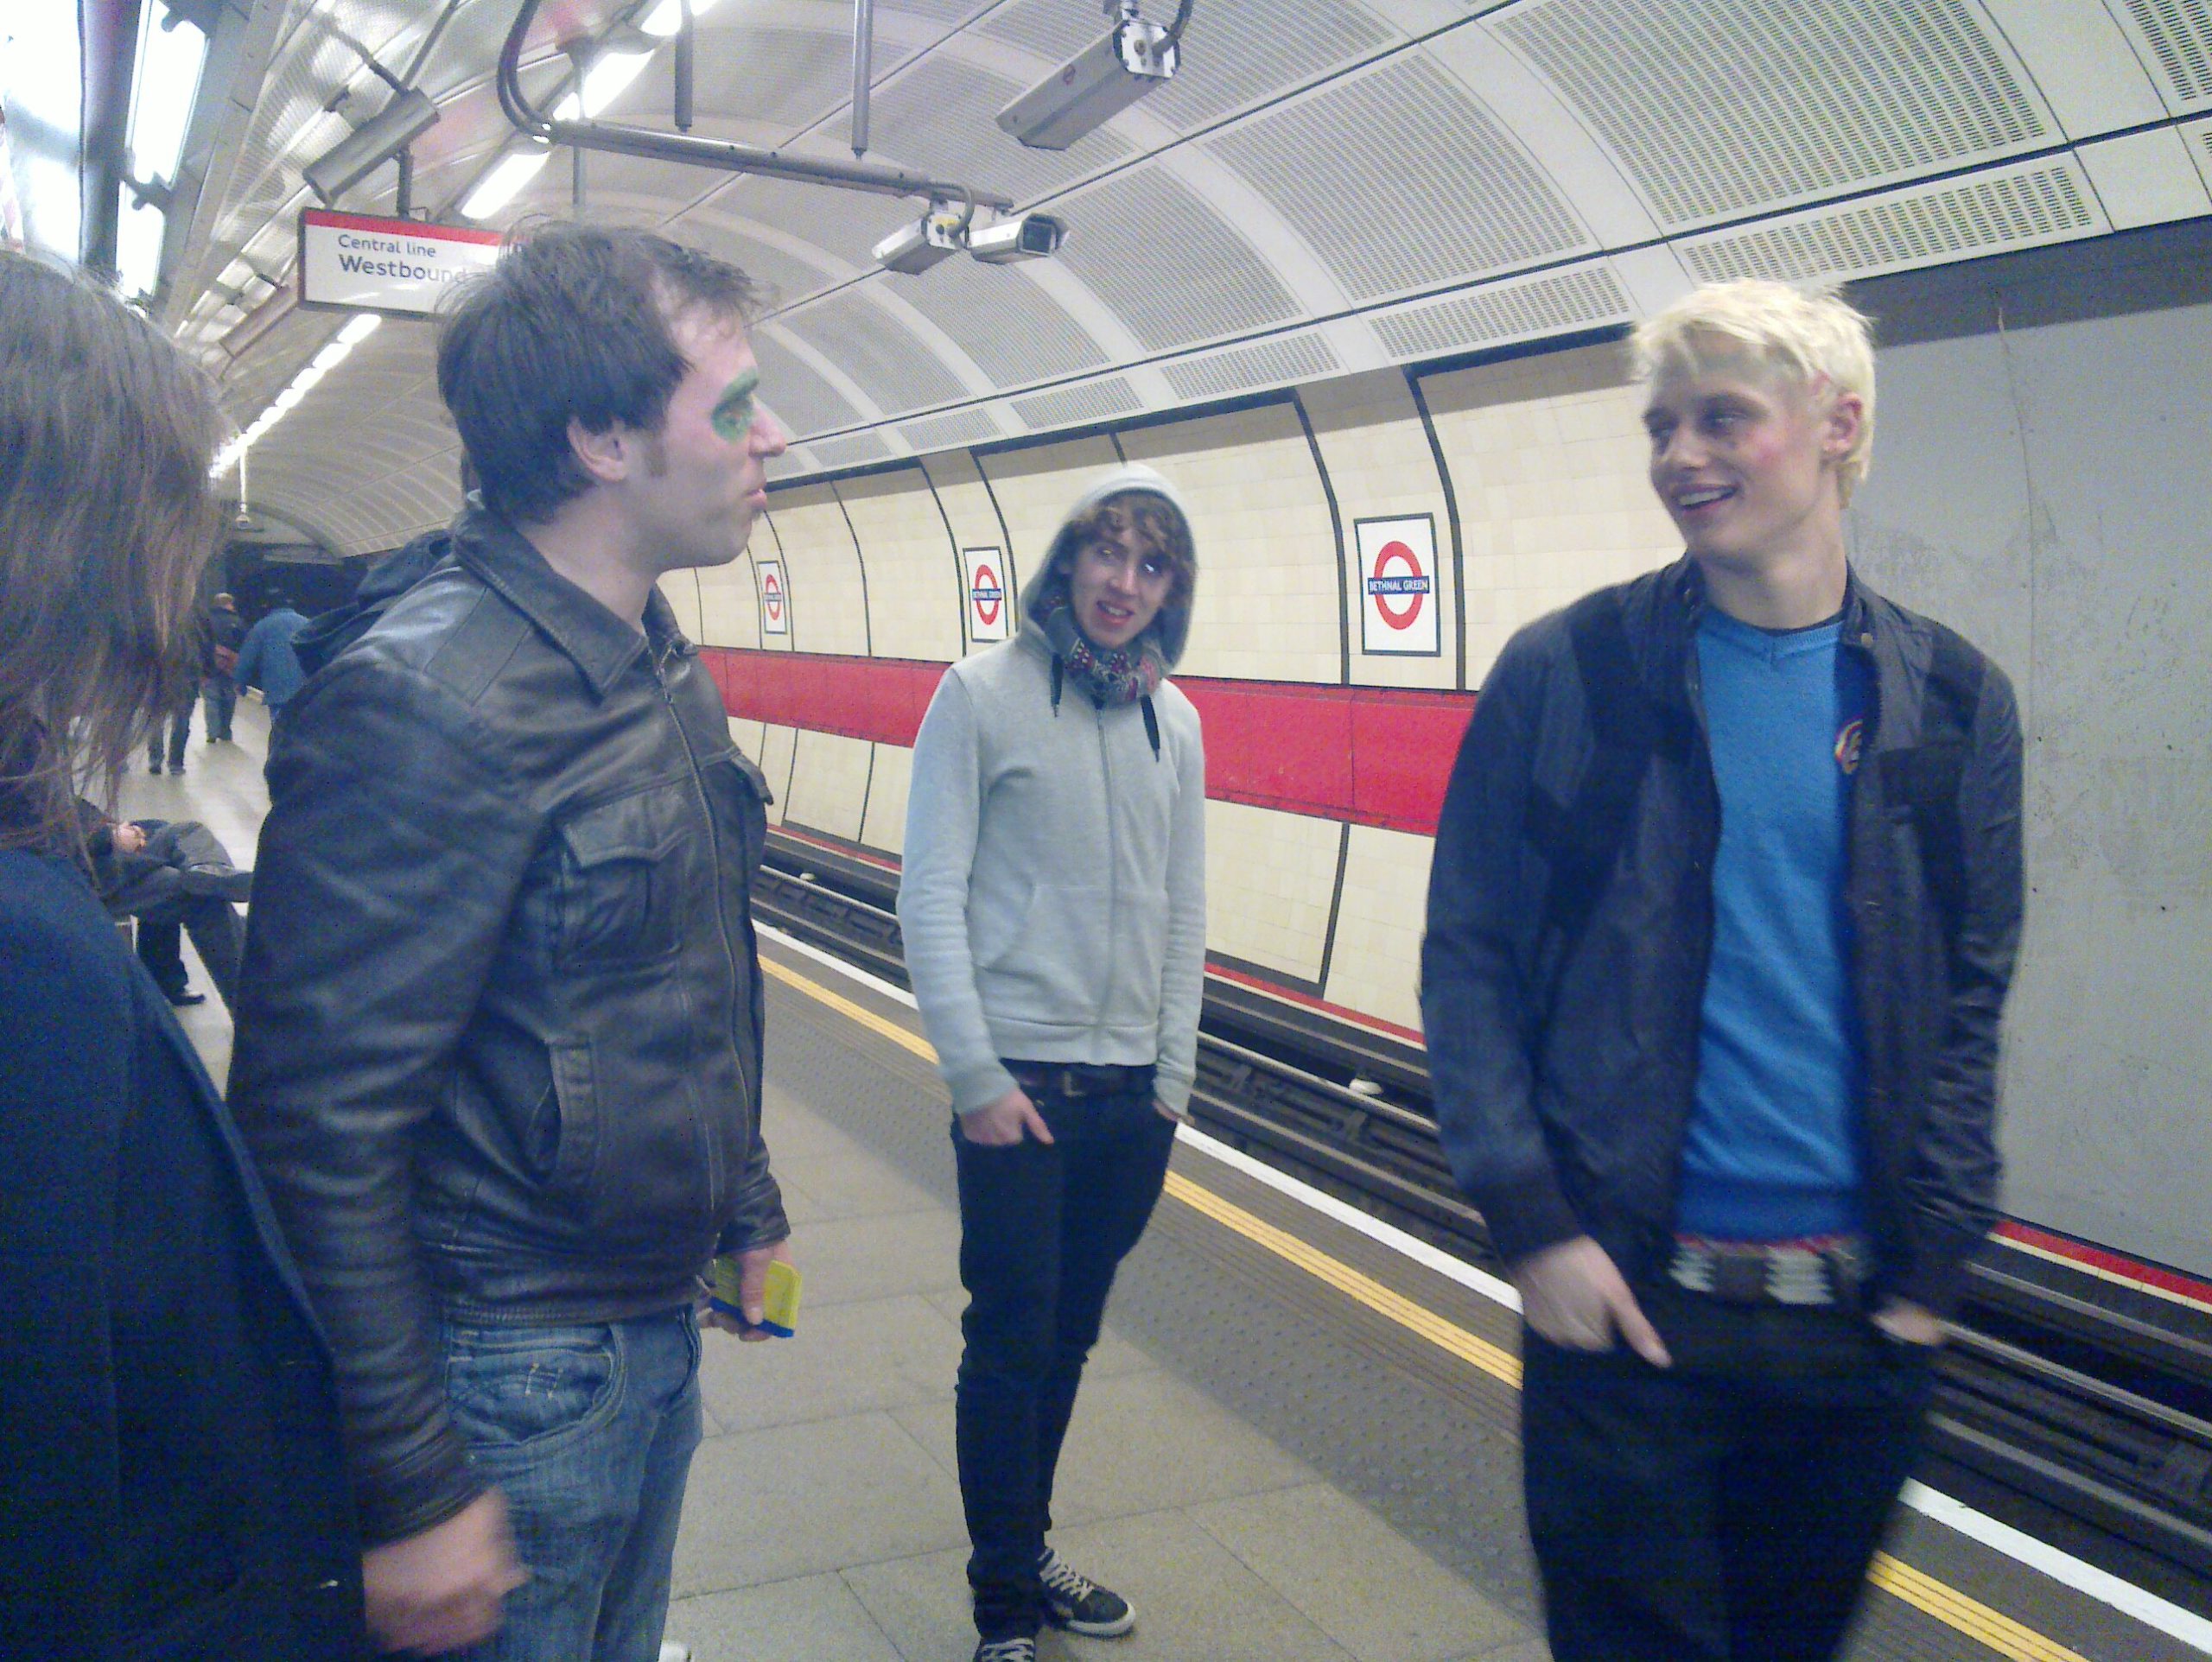 Robin and friends on the London Underground